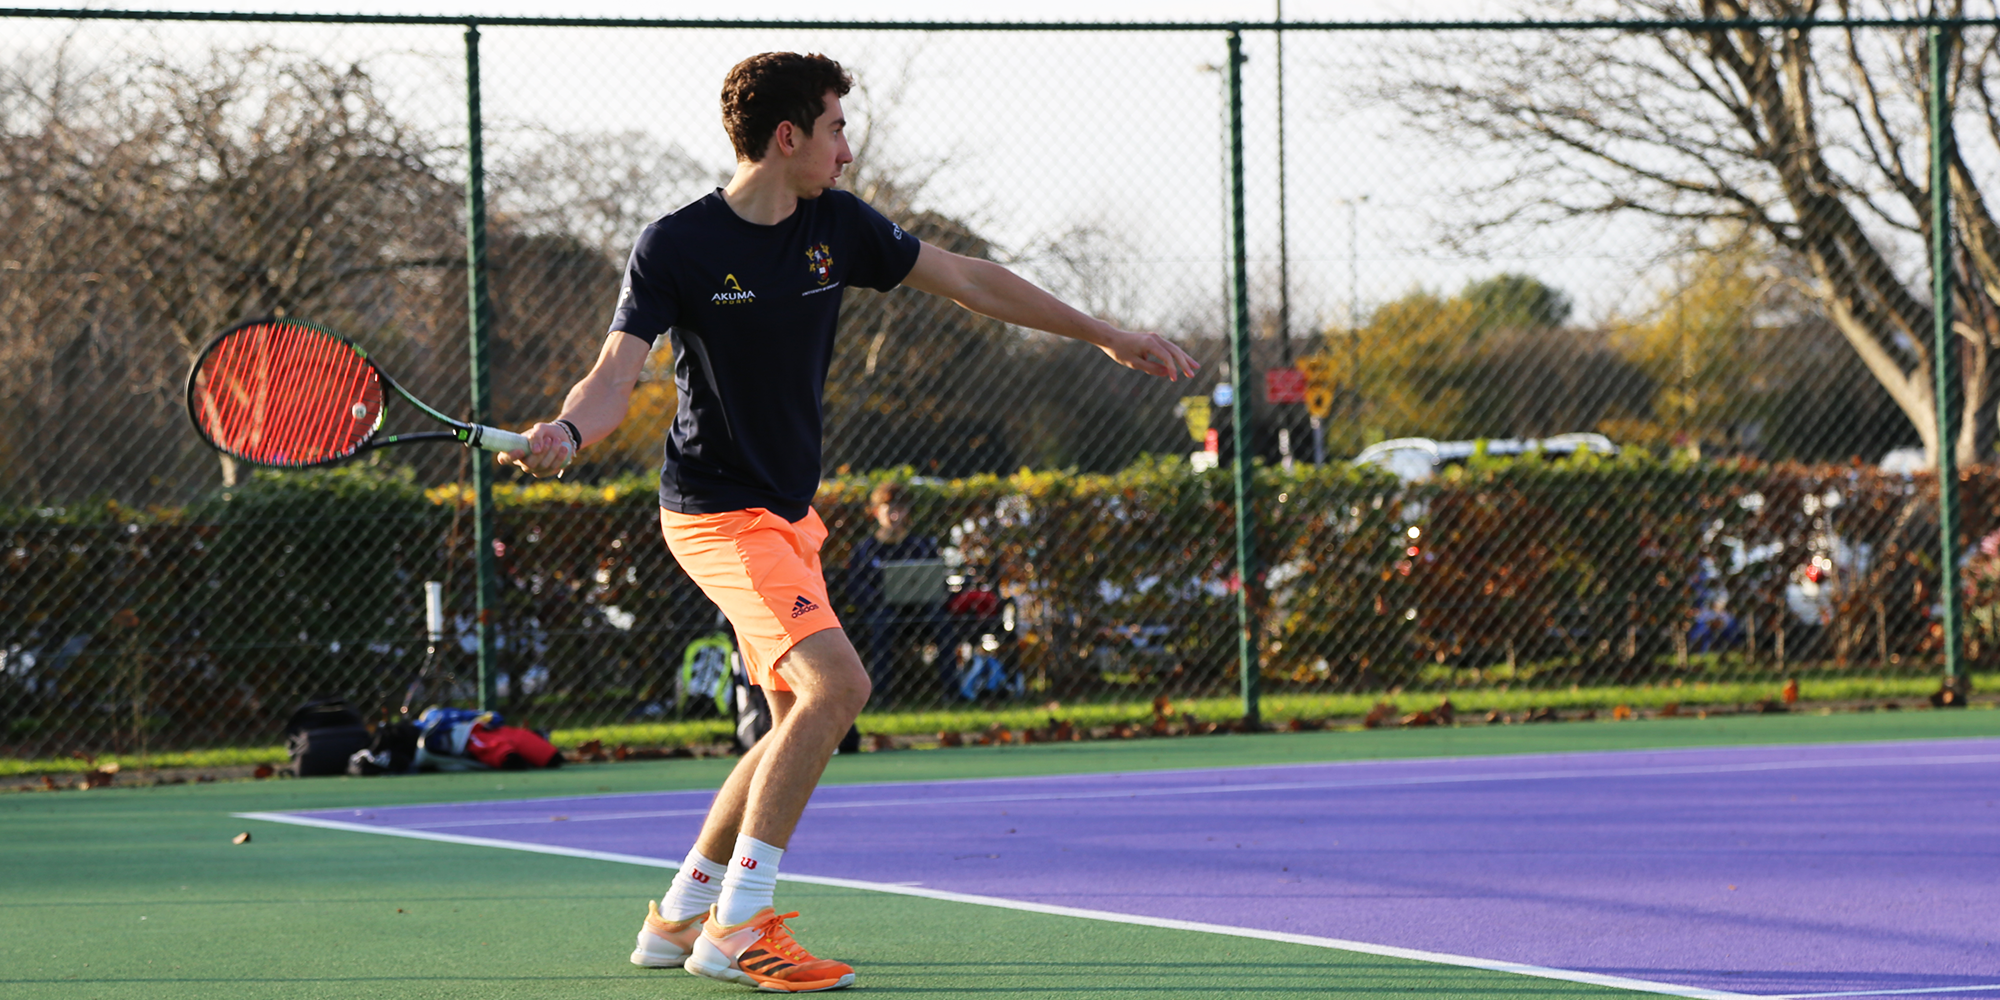 Are you interested in playing sport? Would you like to play competitively for the University or recreationally with friends? Here at the University of Chichester we have a wide range of sports for you to play.